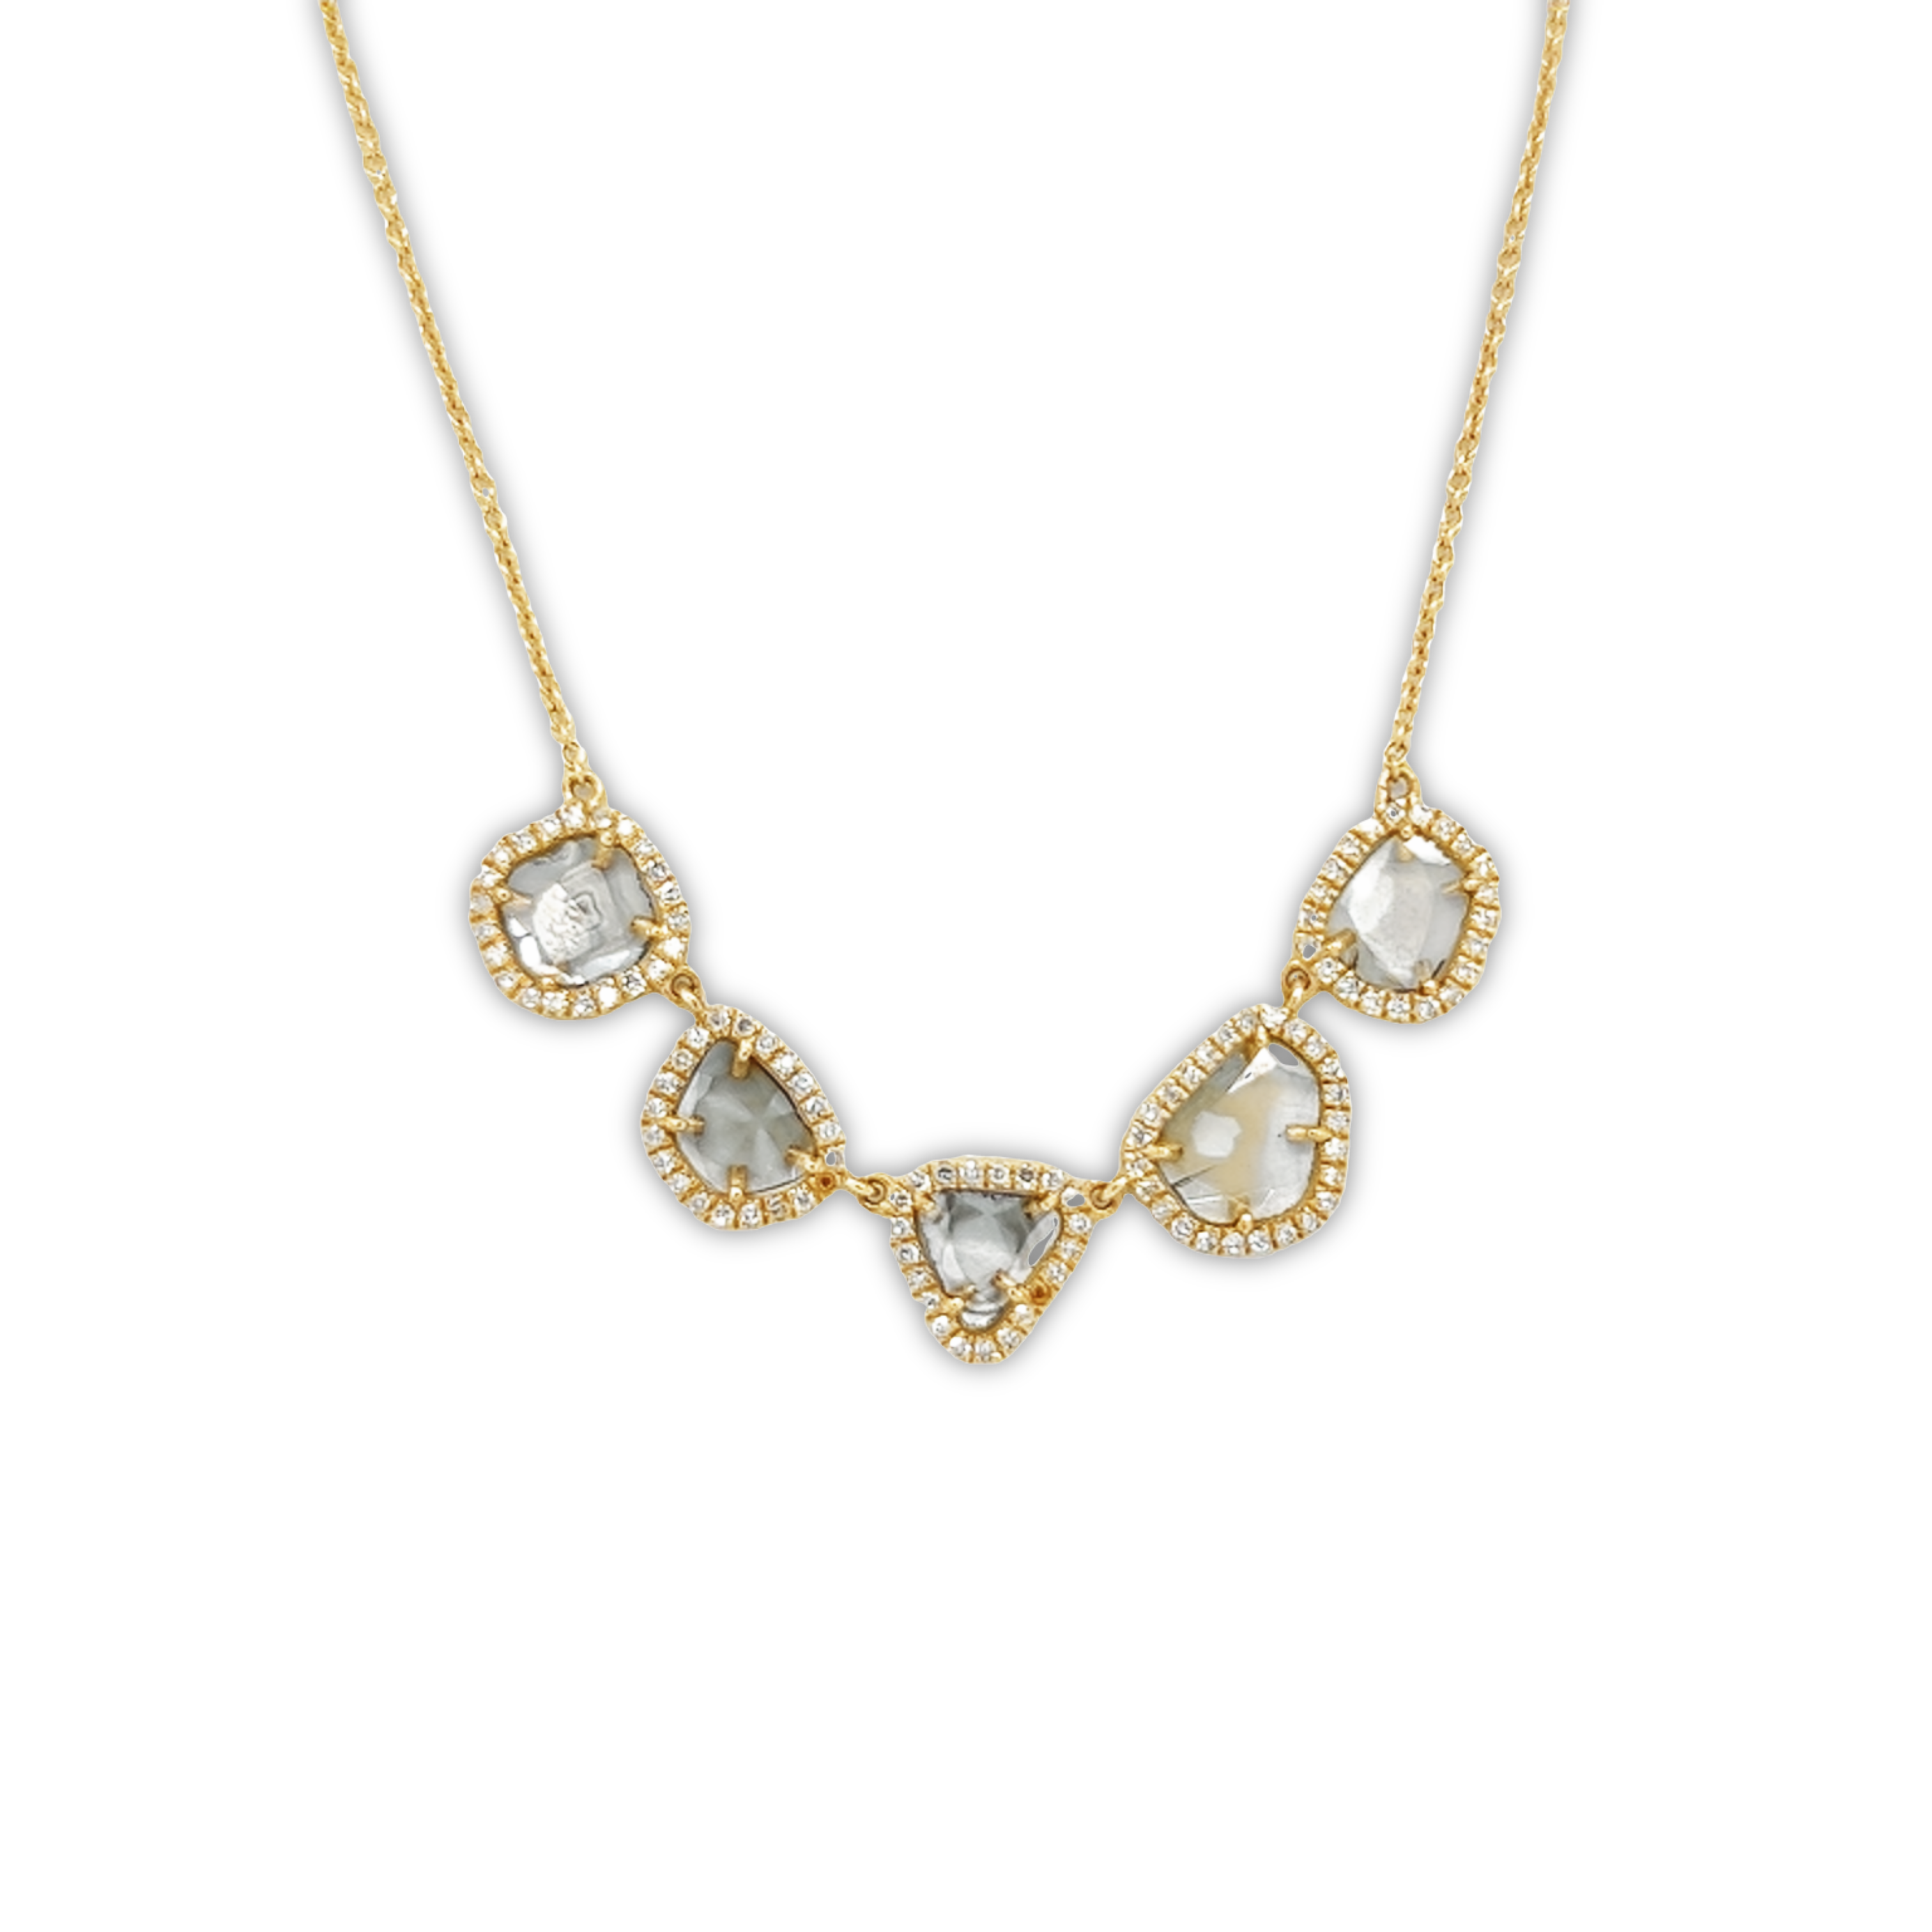 Featured image for “Champagne Diamond 5 Slices Necklace”